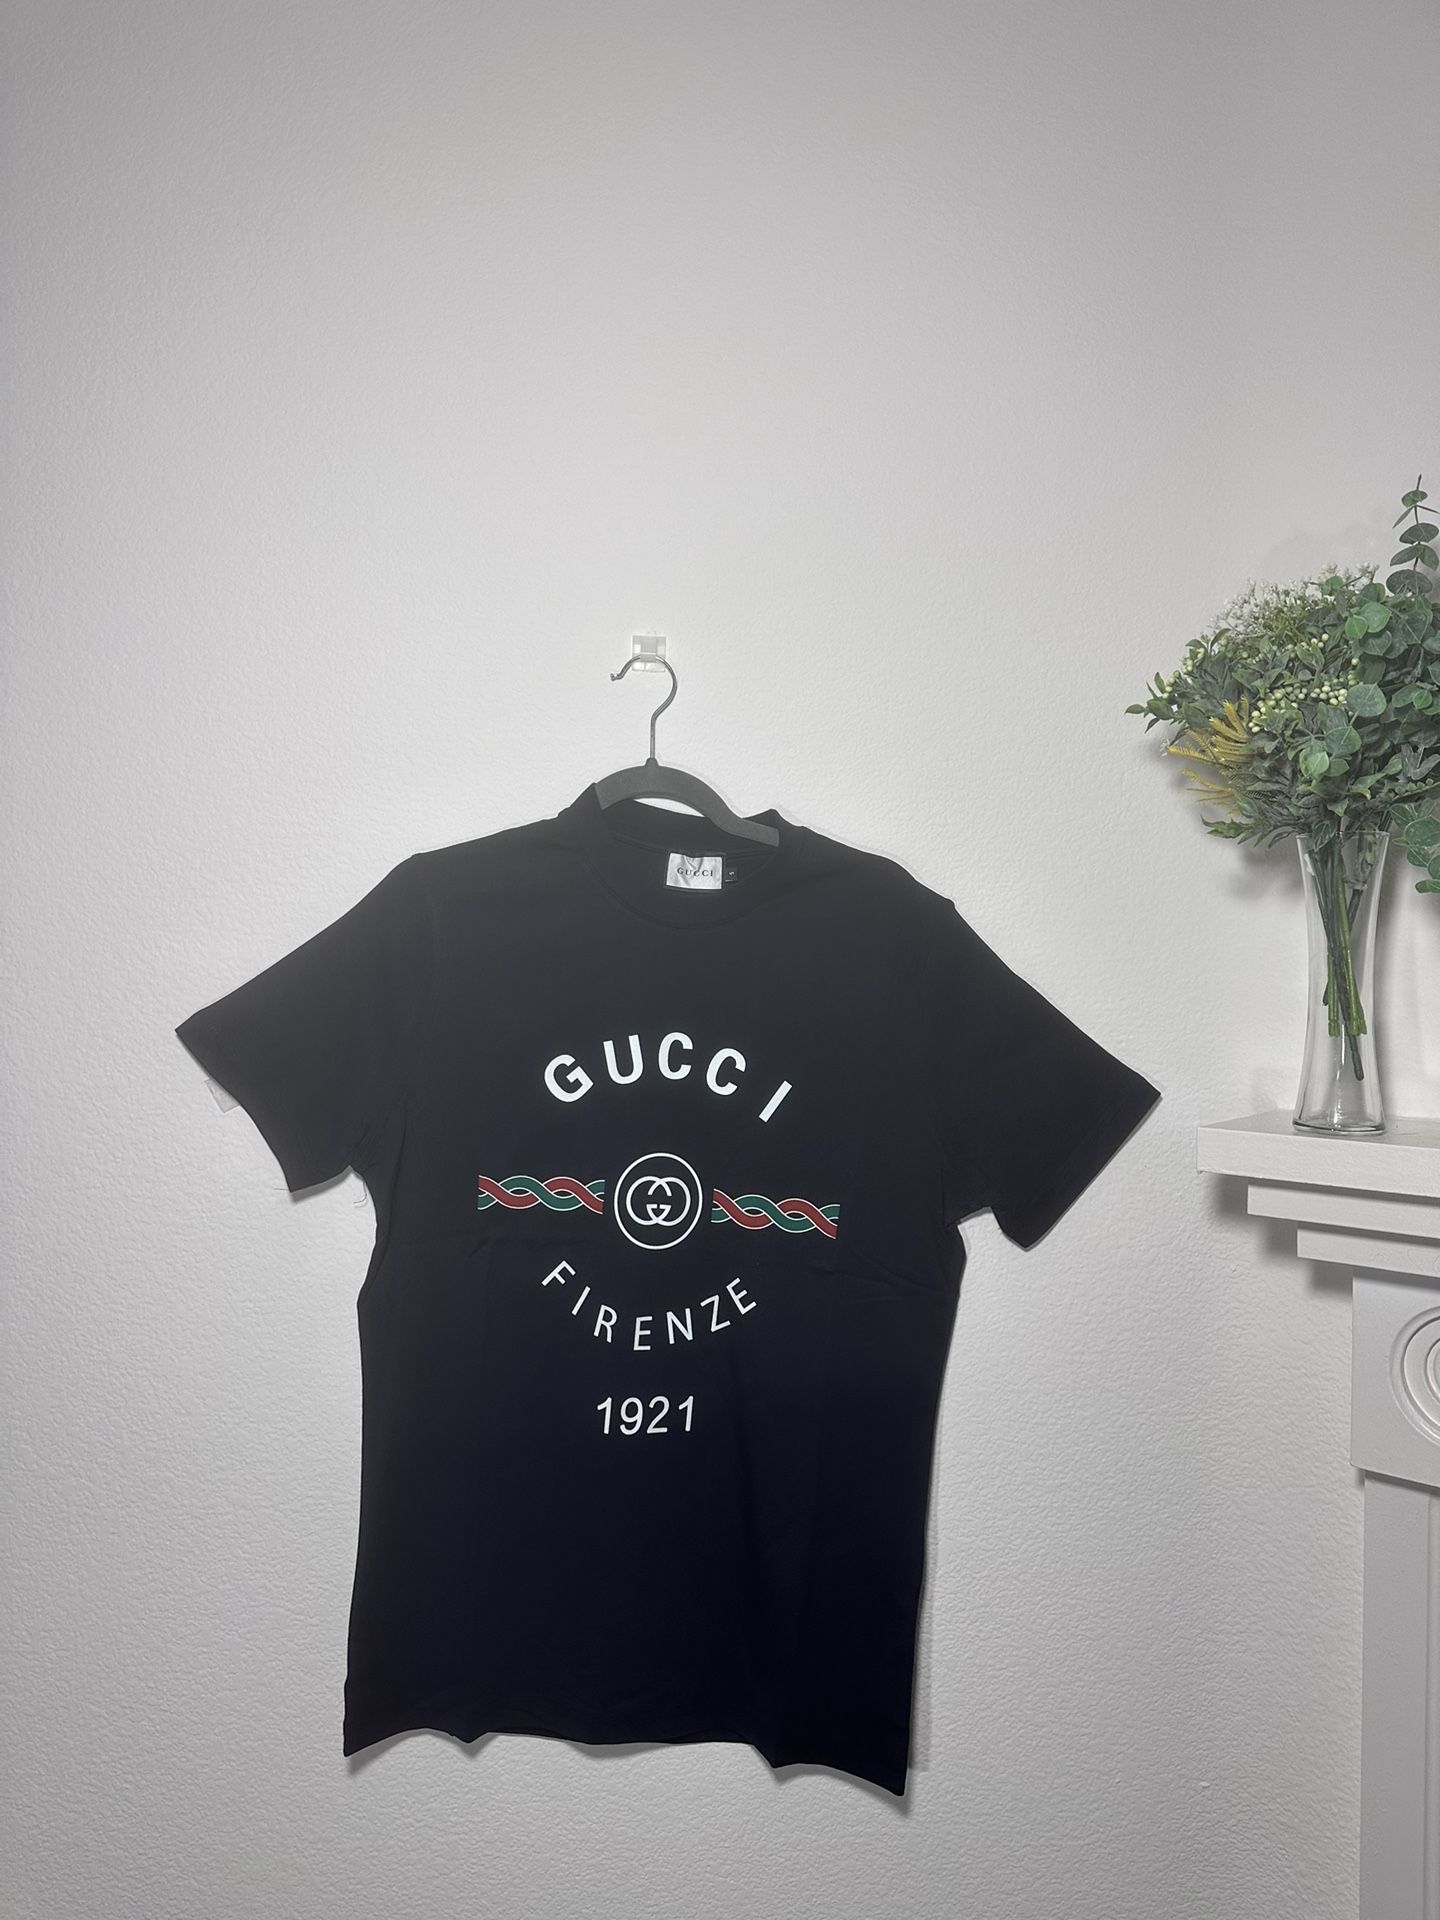 Gucci Tshirt for Sale in San Diego, CA - OfferUp